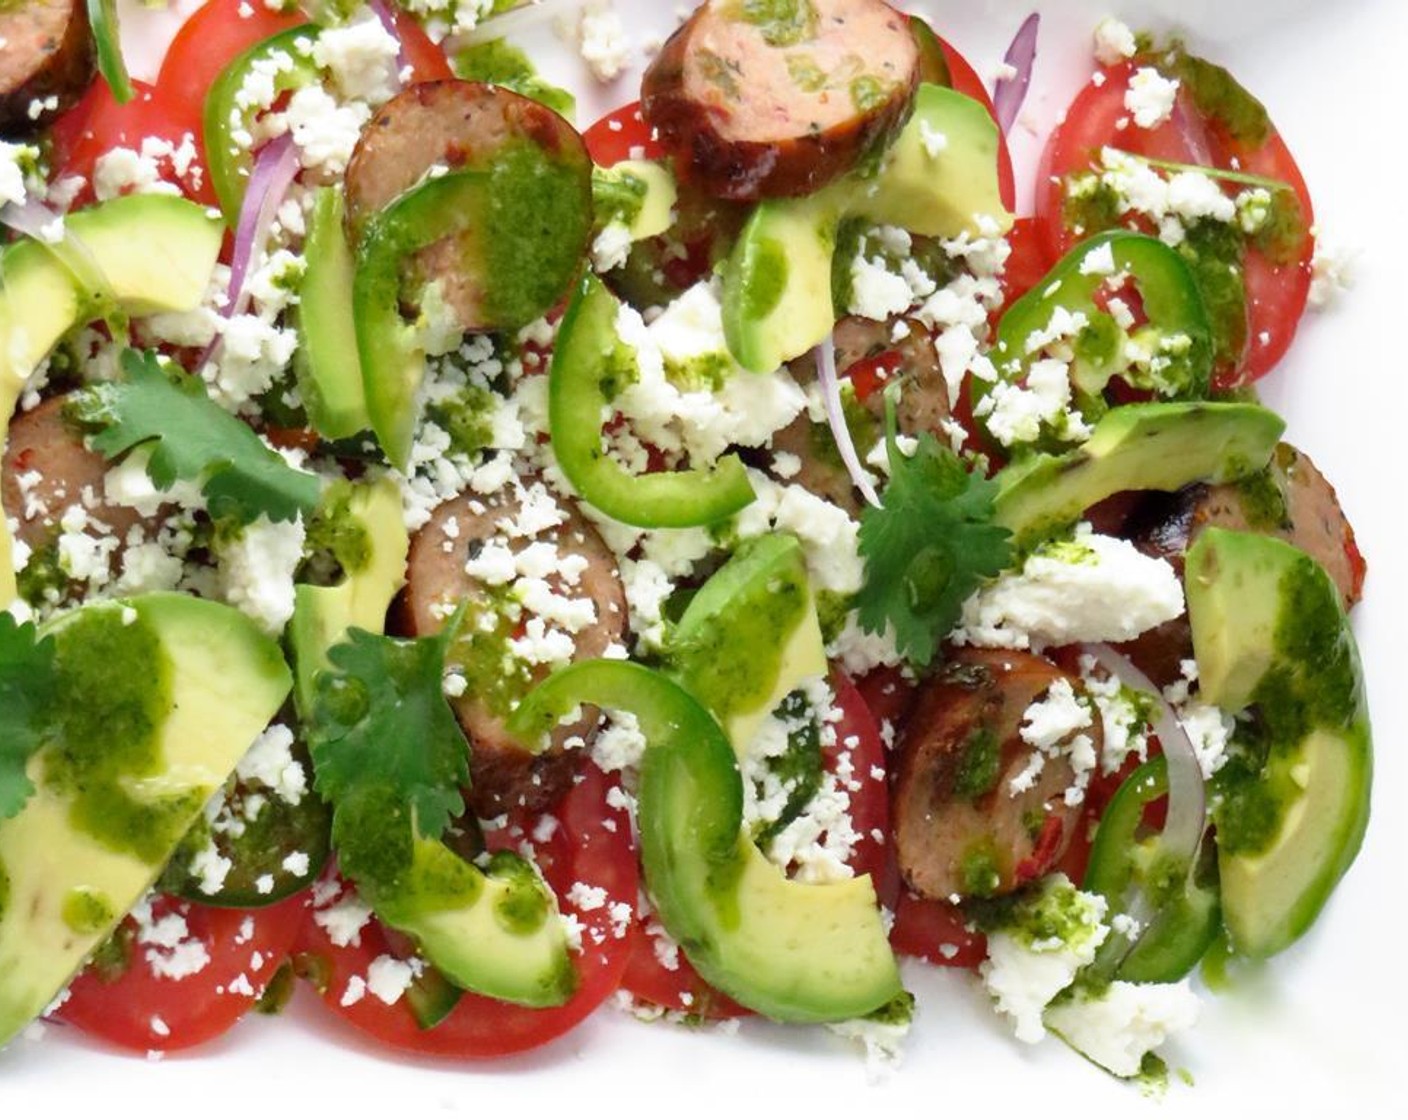 step 4 On a large platter, assemble salad by layering small red onion, plum tomatoes, jalapeno pepper, sausage slices, avocado, queso fresco, and cilantro leaves. Garnish with Lime (1) and drizzle with cilantro dressing. Serve and enjoy!